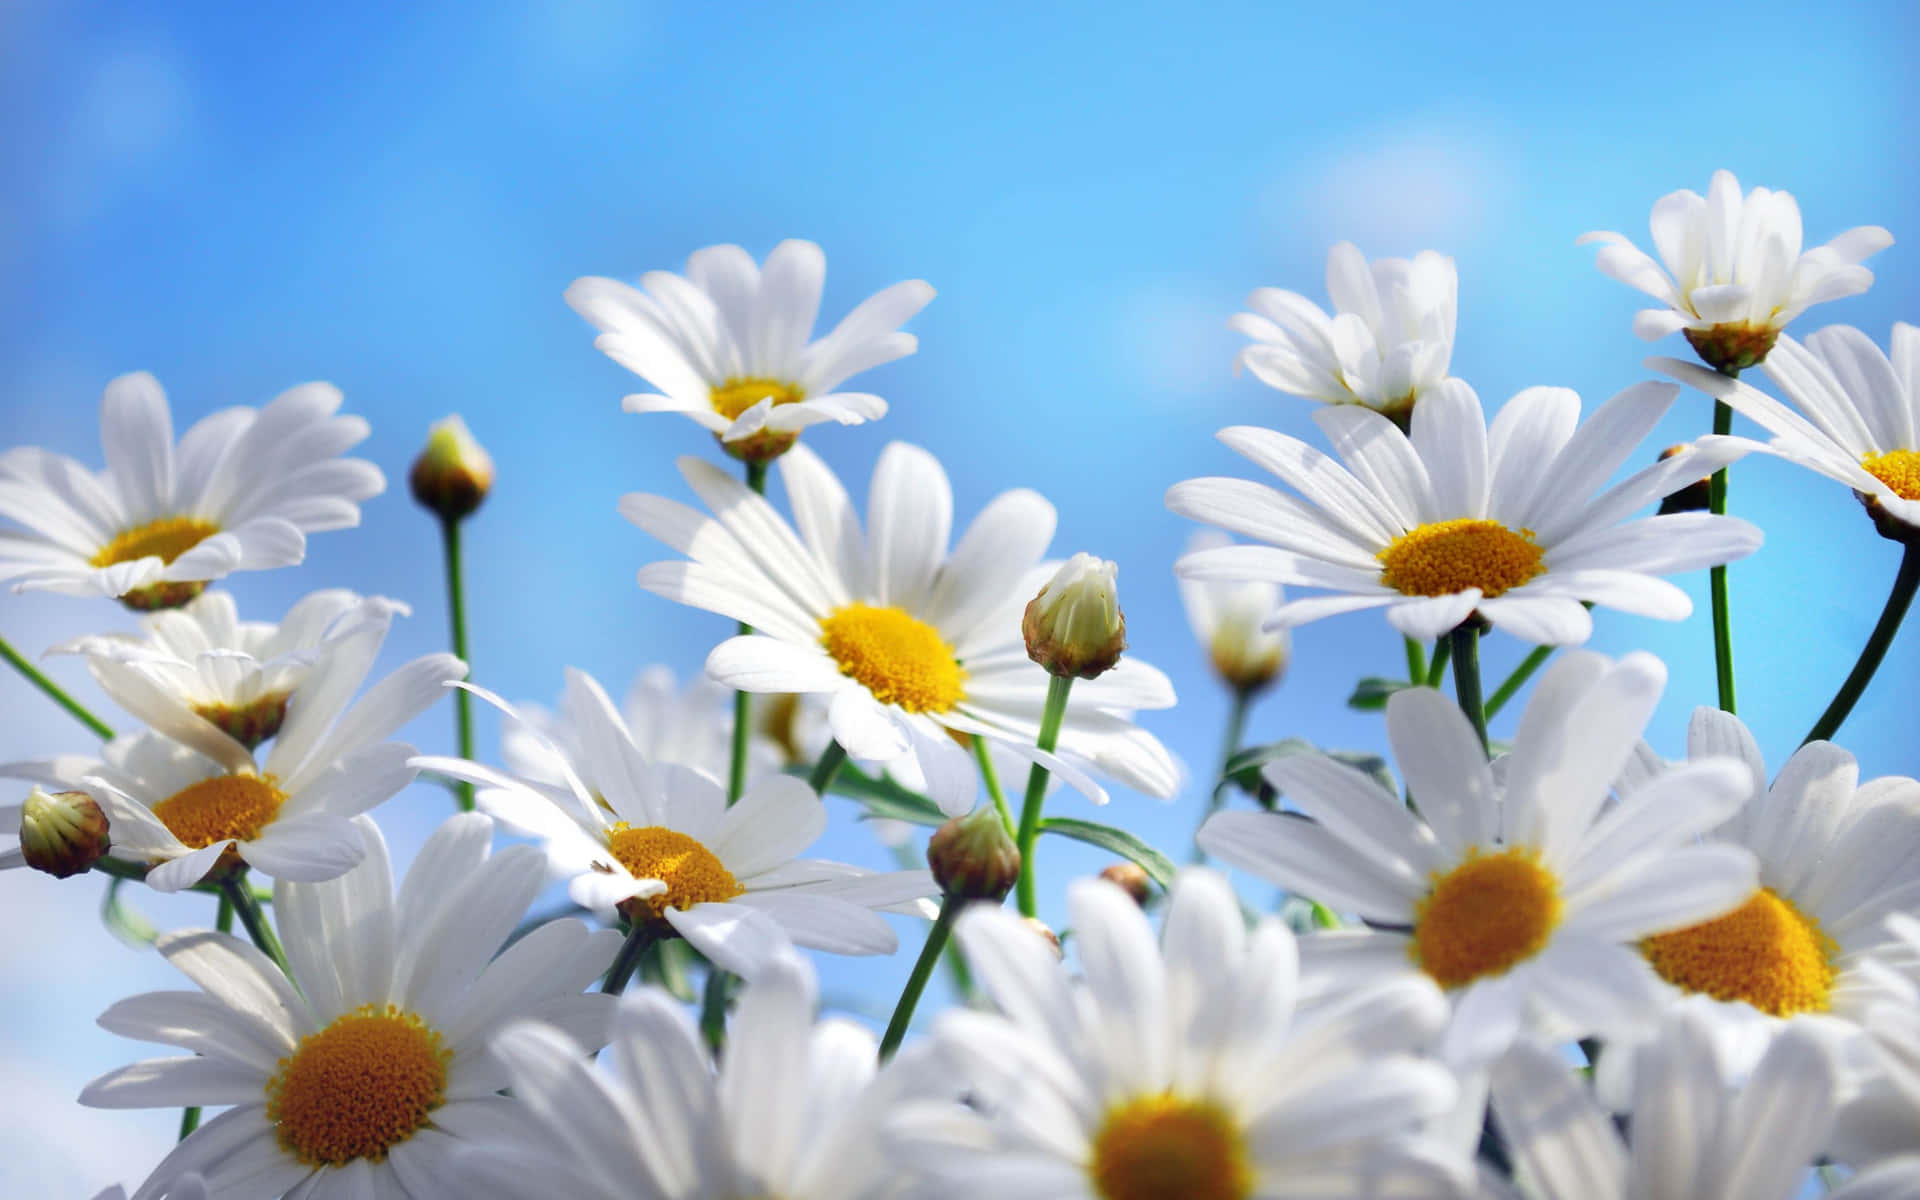 Capture the Moment with Daisy Laptop Wallpaper